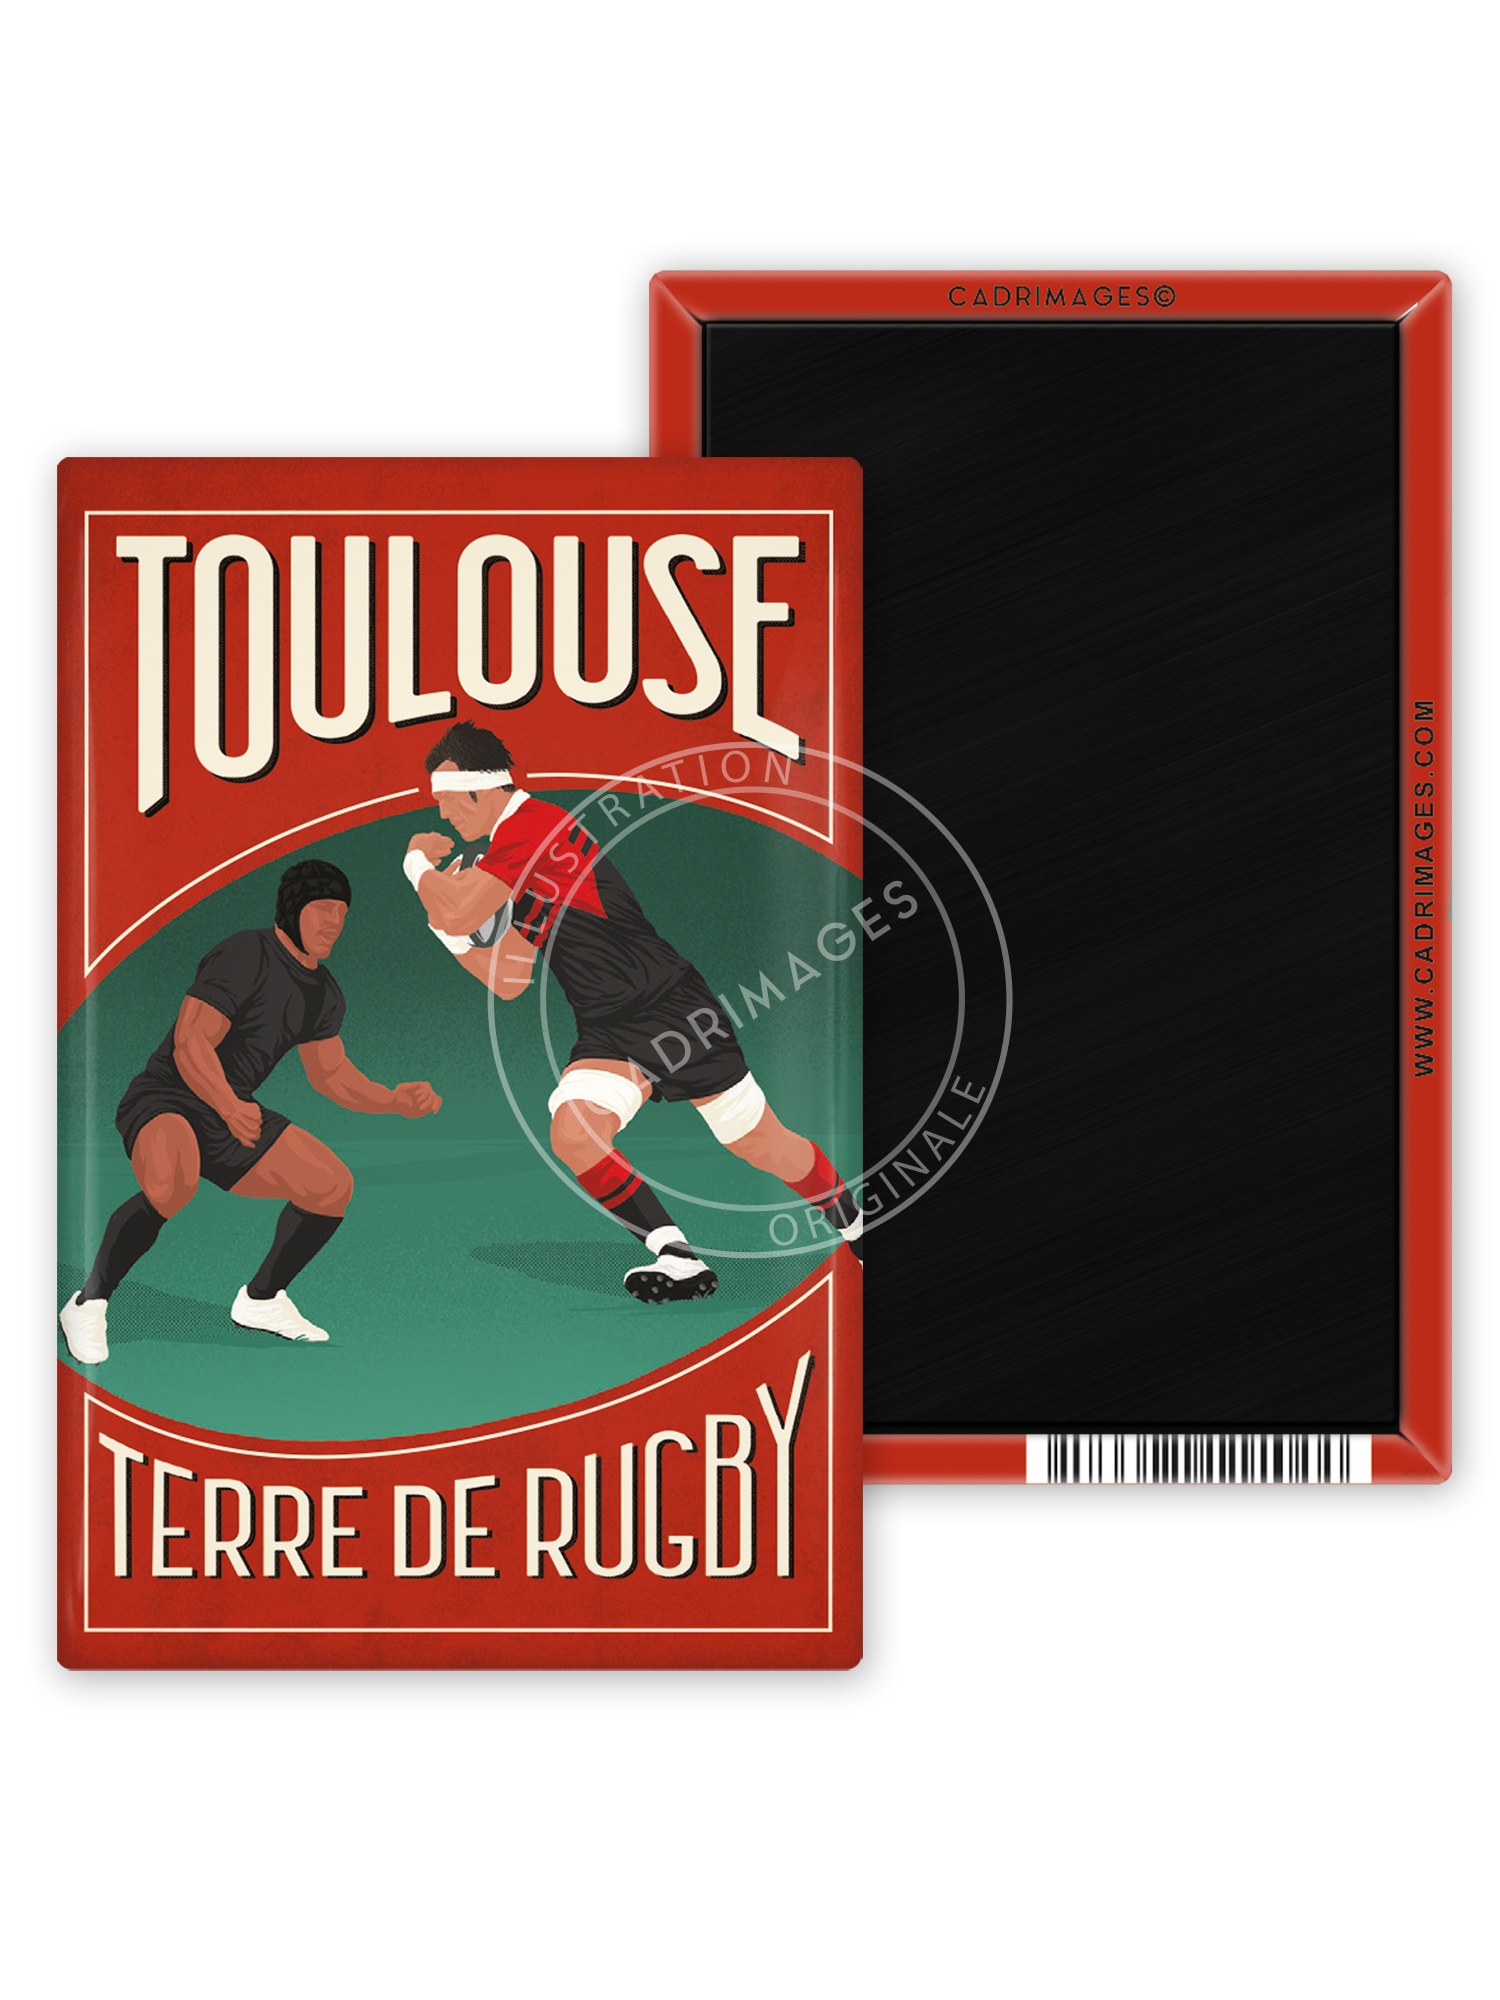 Magnet de rugby, Toulouse rugby